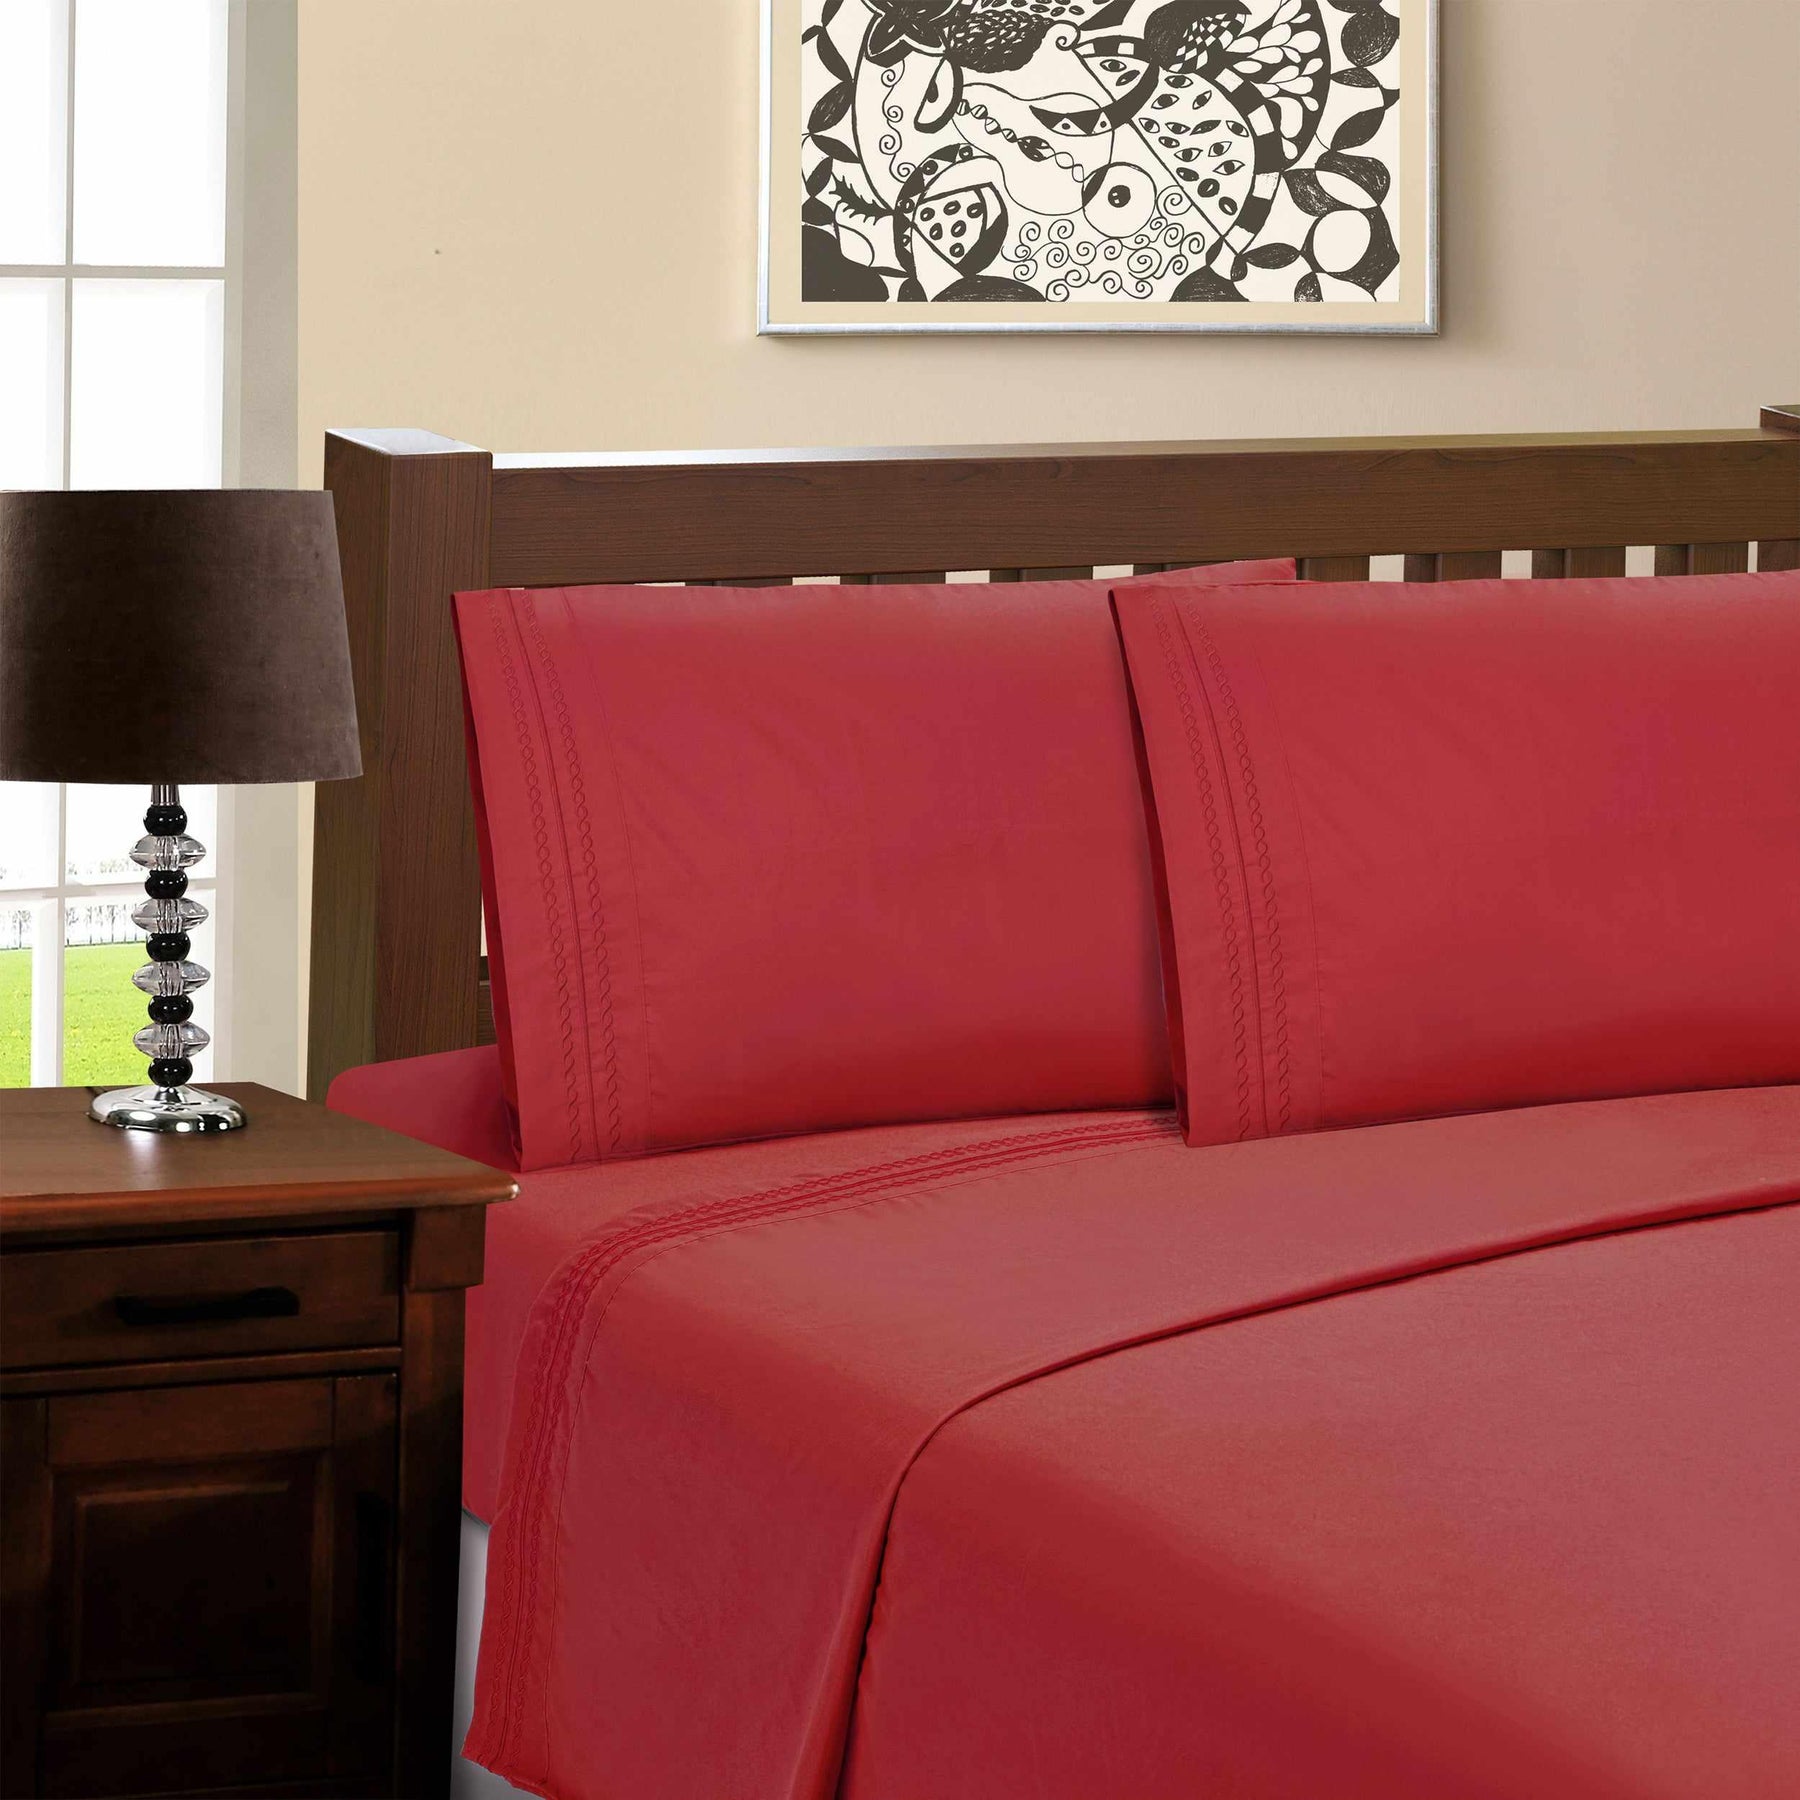 Microfiber Wrinkle Resistant and Breathable Solid Infinity Embroidery Pillowcase Set - Red